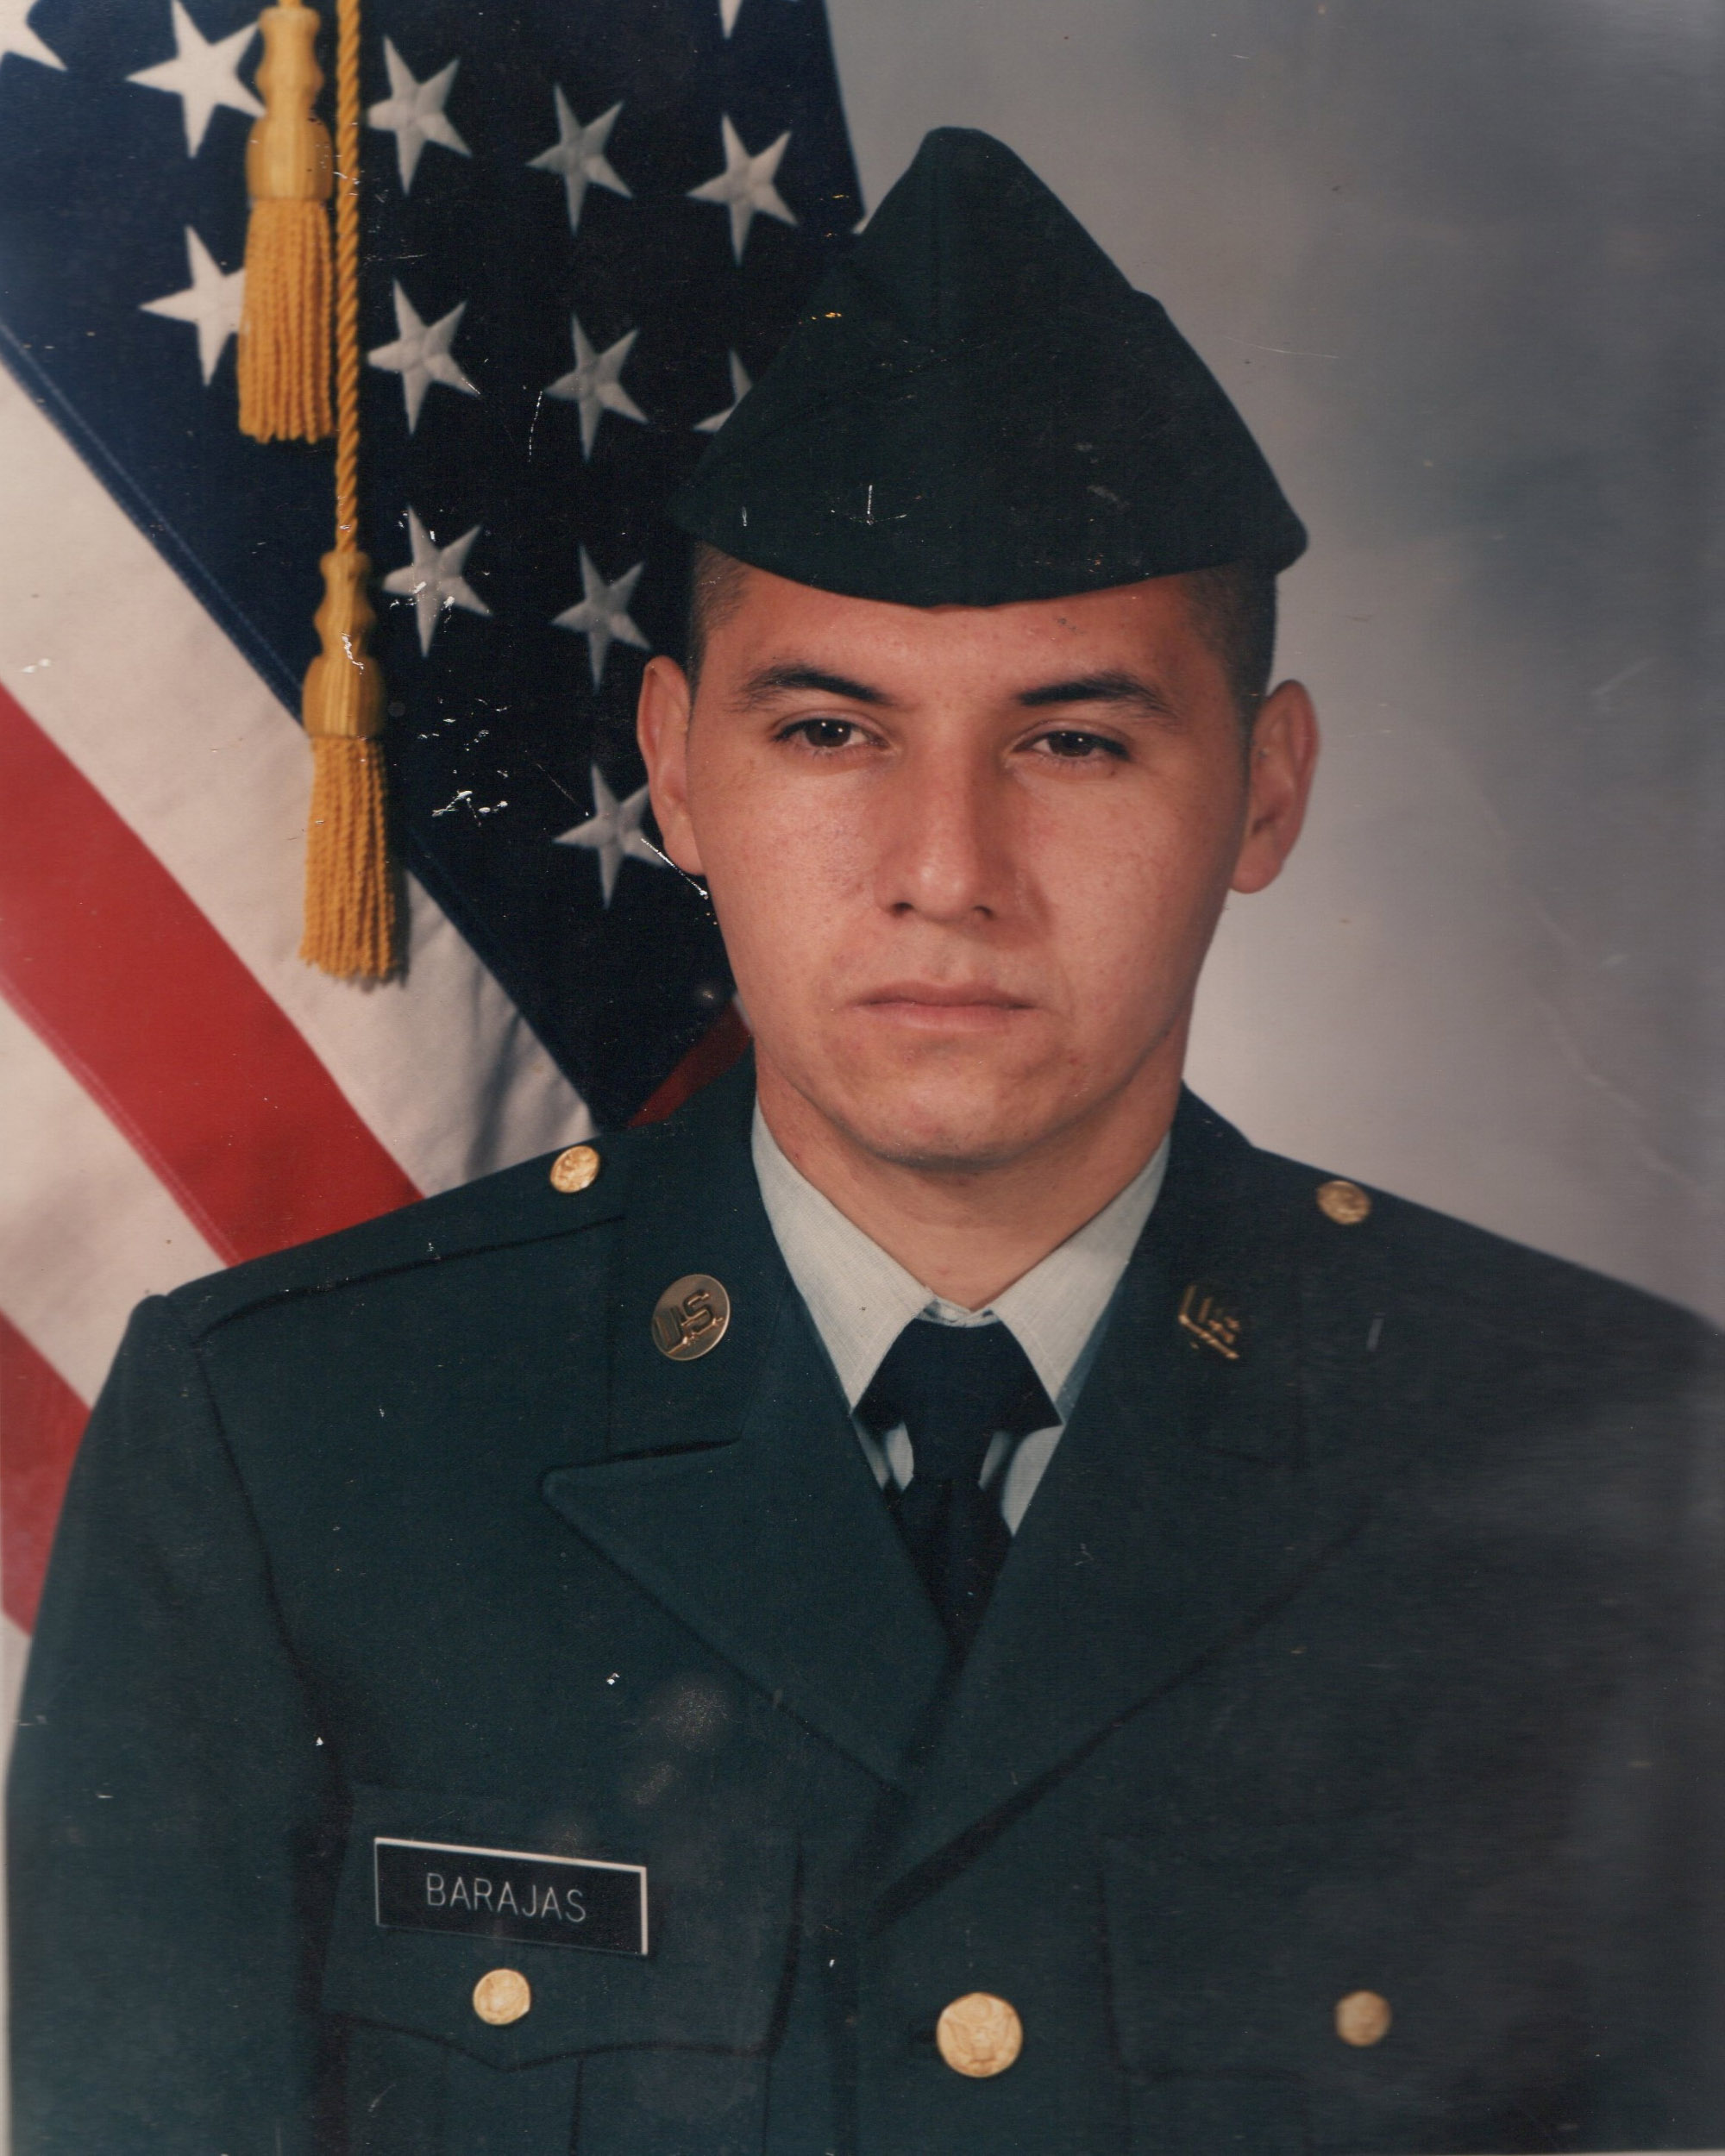 After being expelled from Compton High, Hector enlisted in the United States Army. Image courtesy of Hector Barajas.